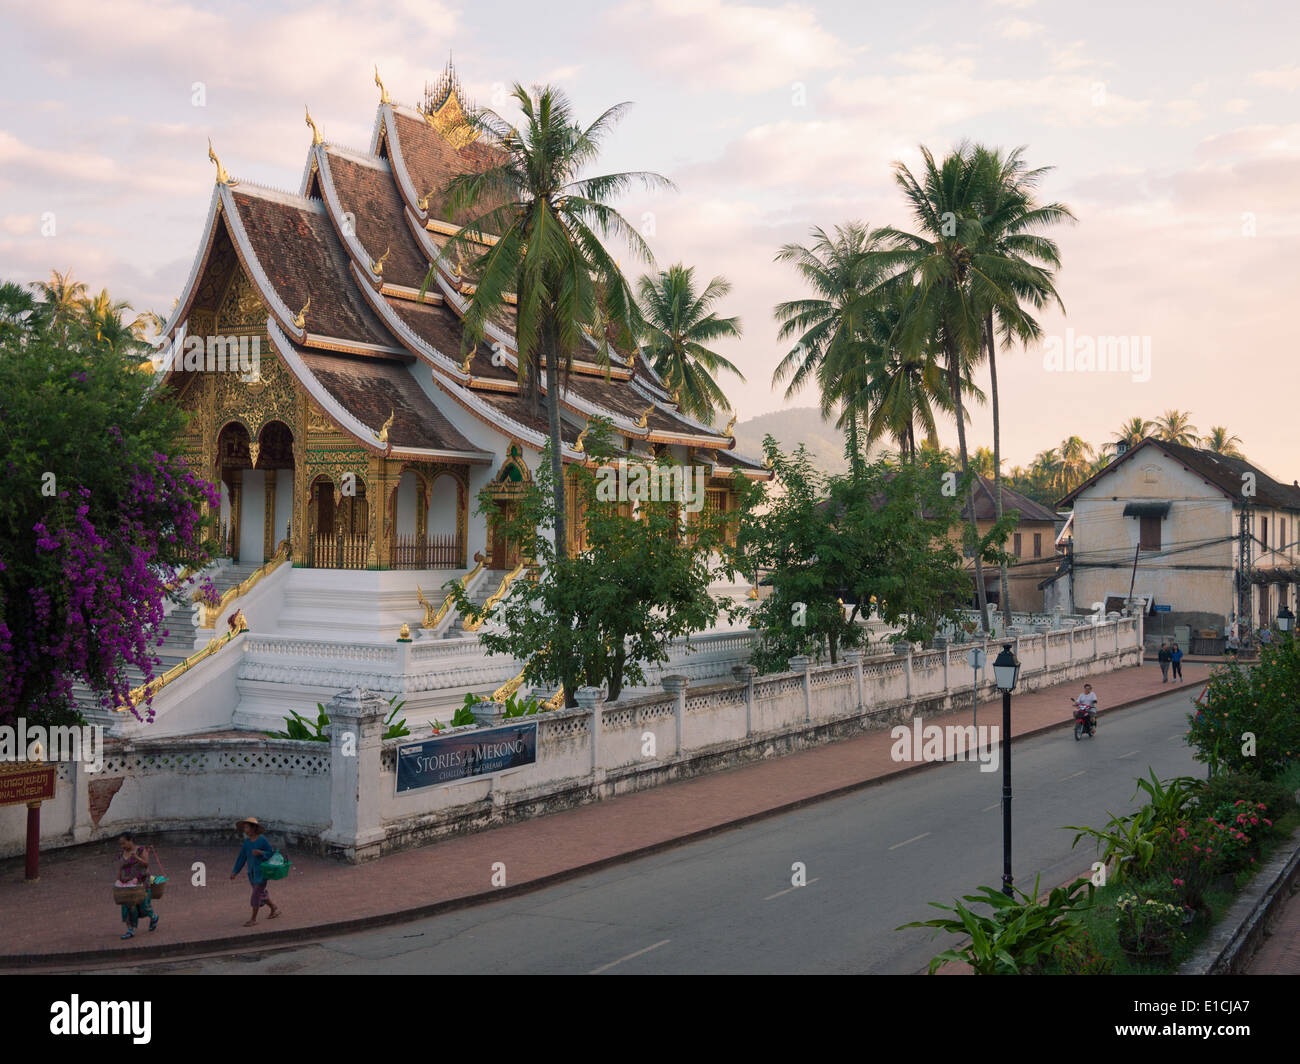 A street scene from Luang Prabang, Laos. Haw Pha Bang (the Golden Hall) and the Royal Palace grounds are on the left. Stock Photo